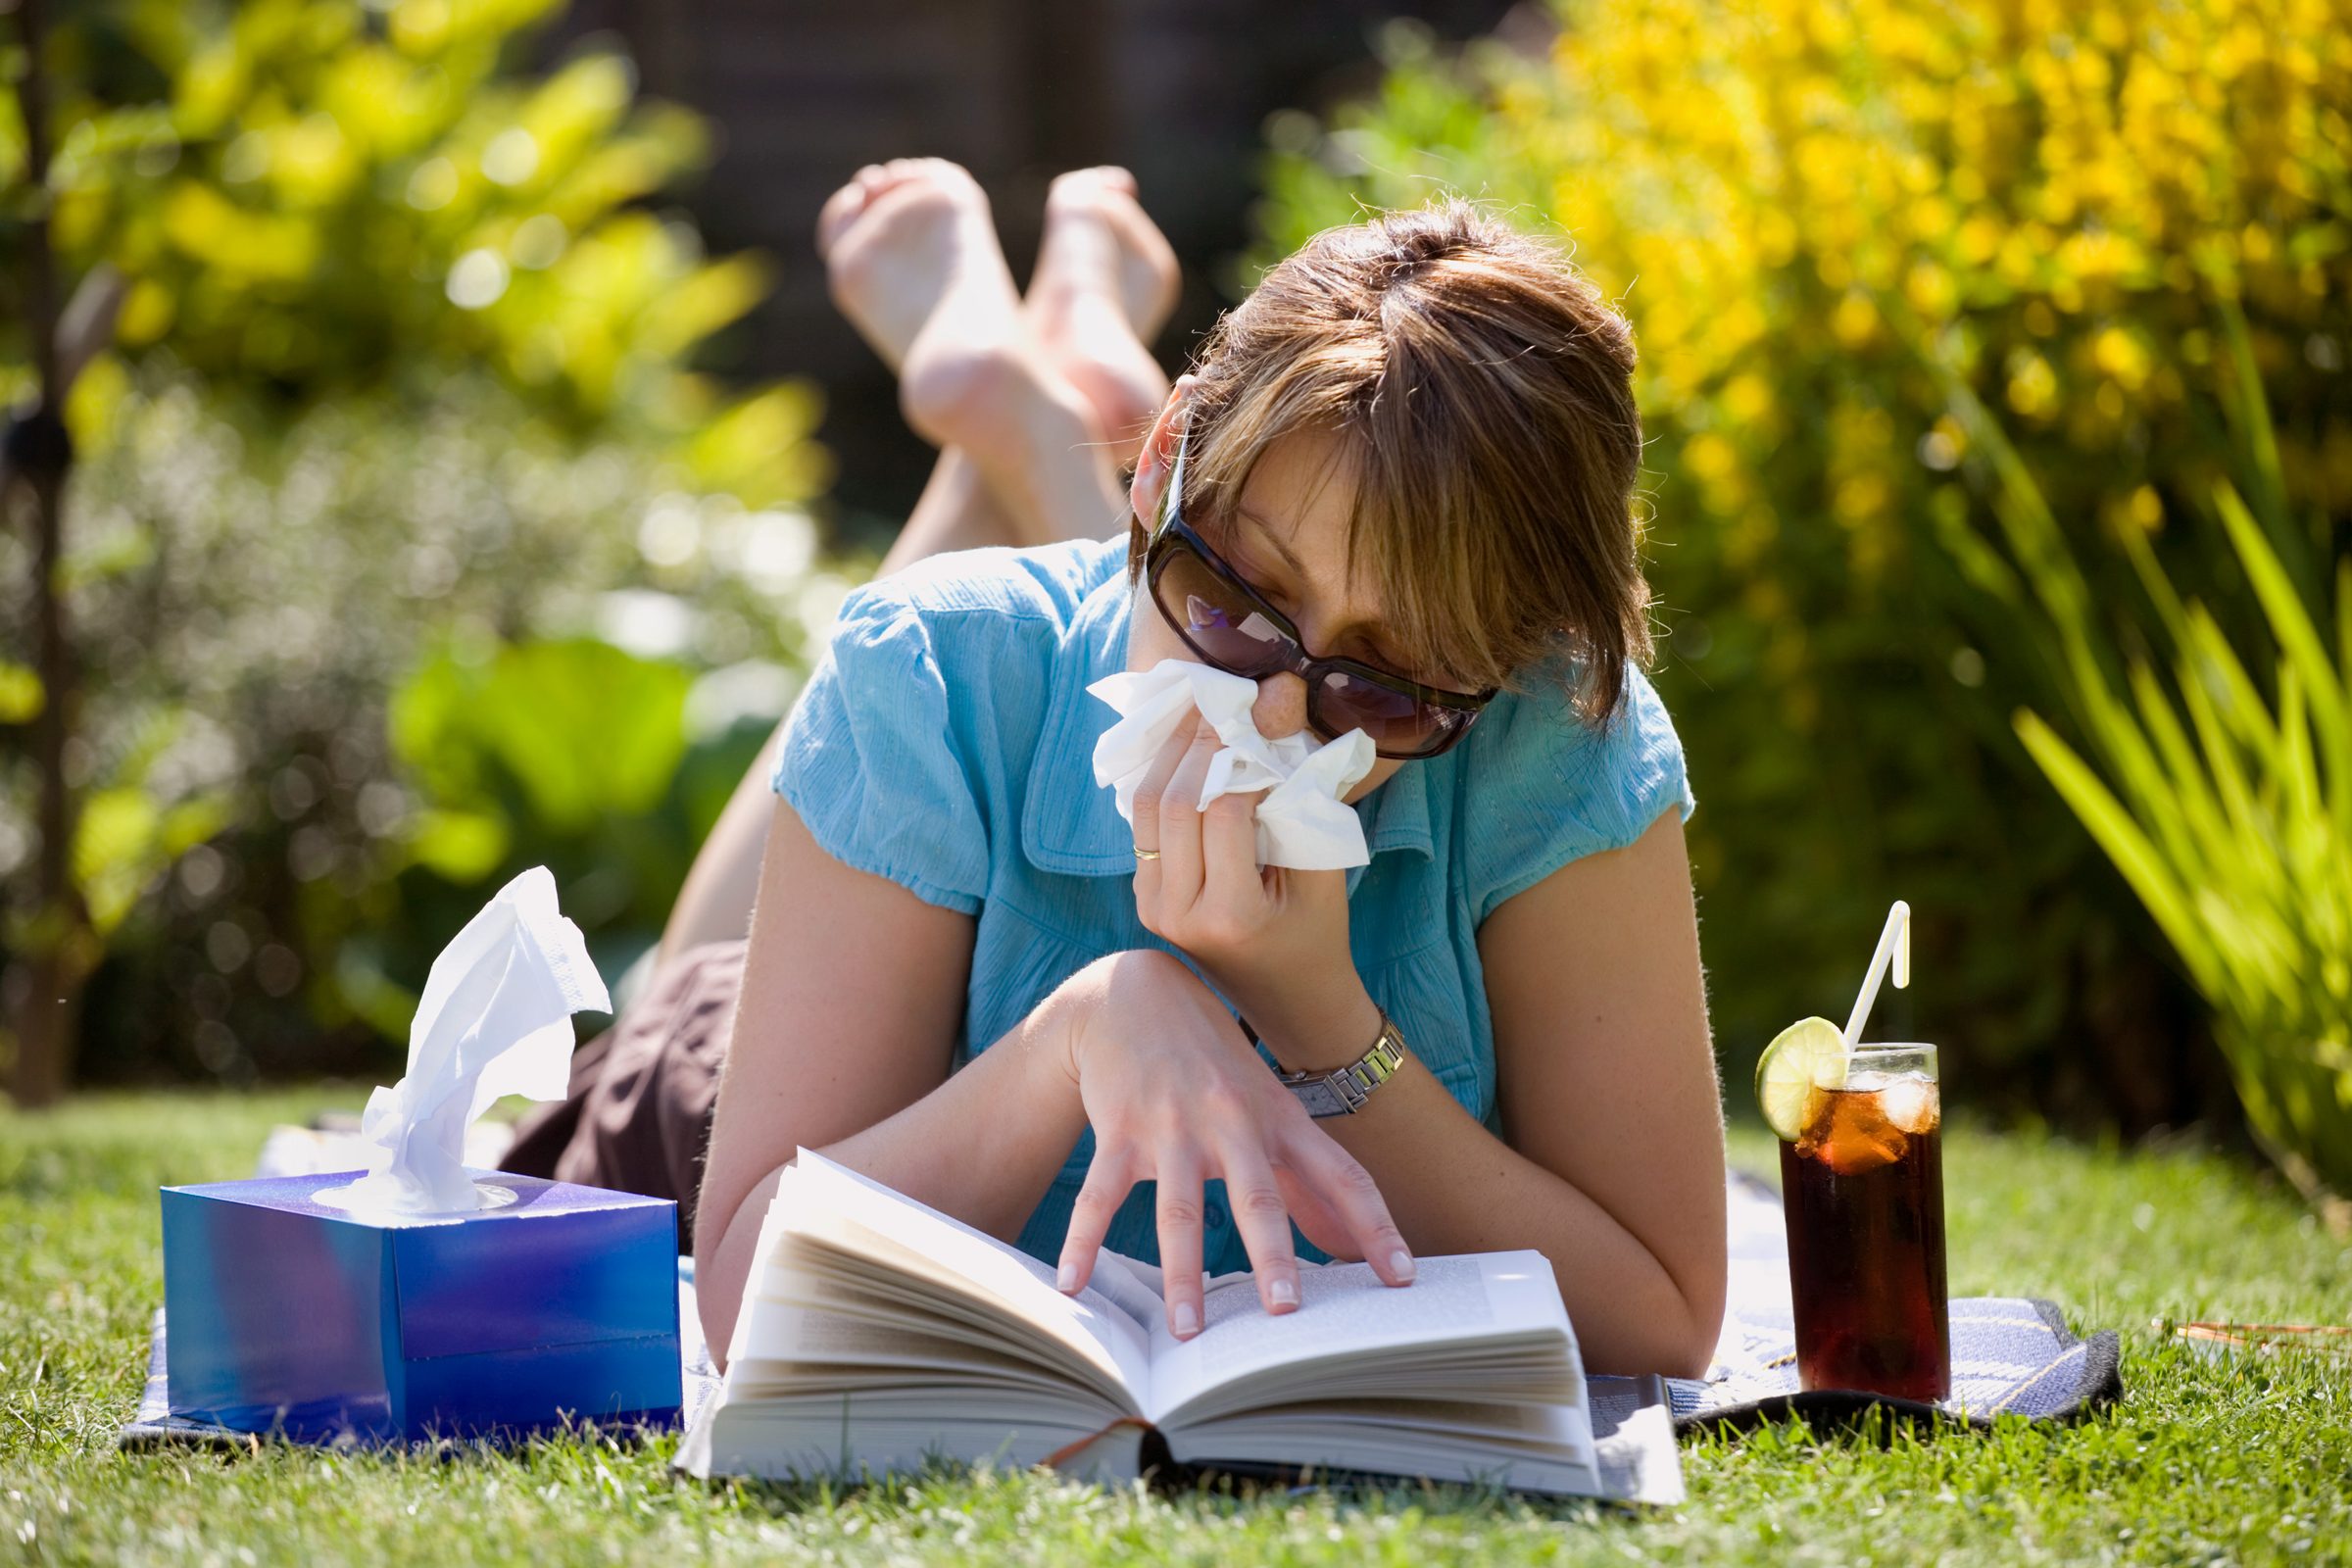 How to Get Rid of Allergies, According to Allergy & Immunology Doctors